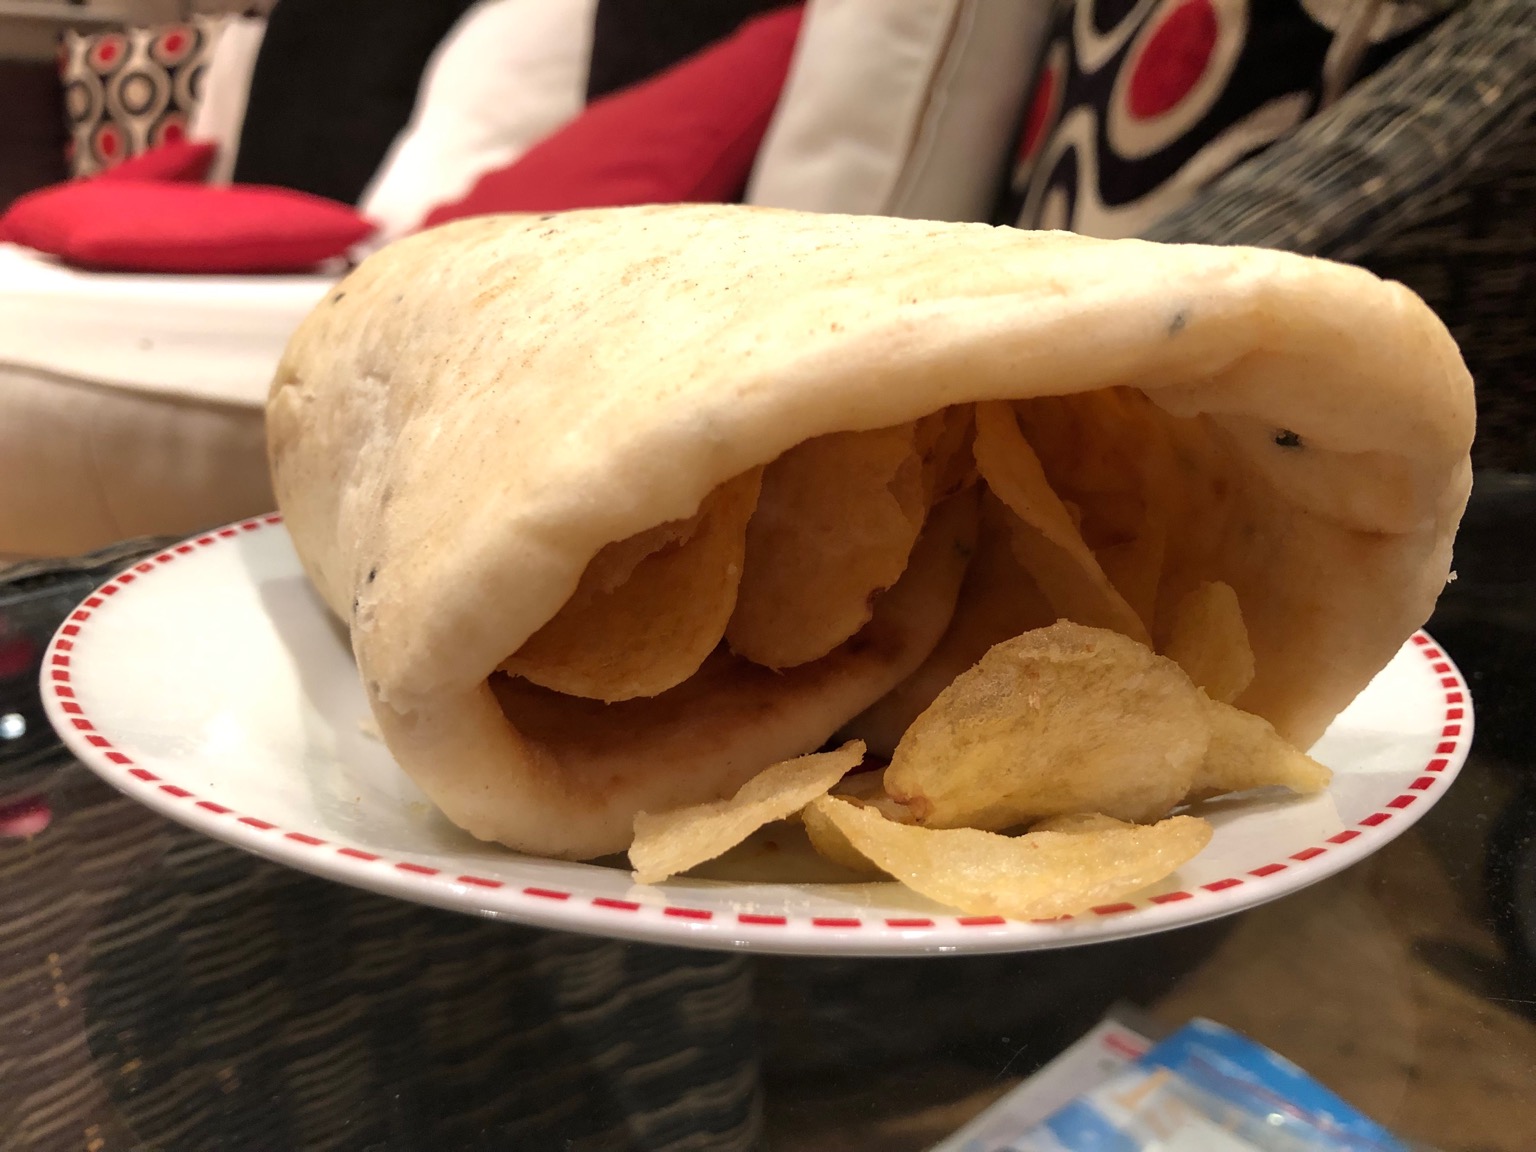 Close-up of naan bread wrapped around crisps